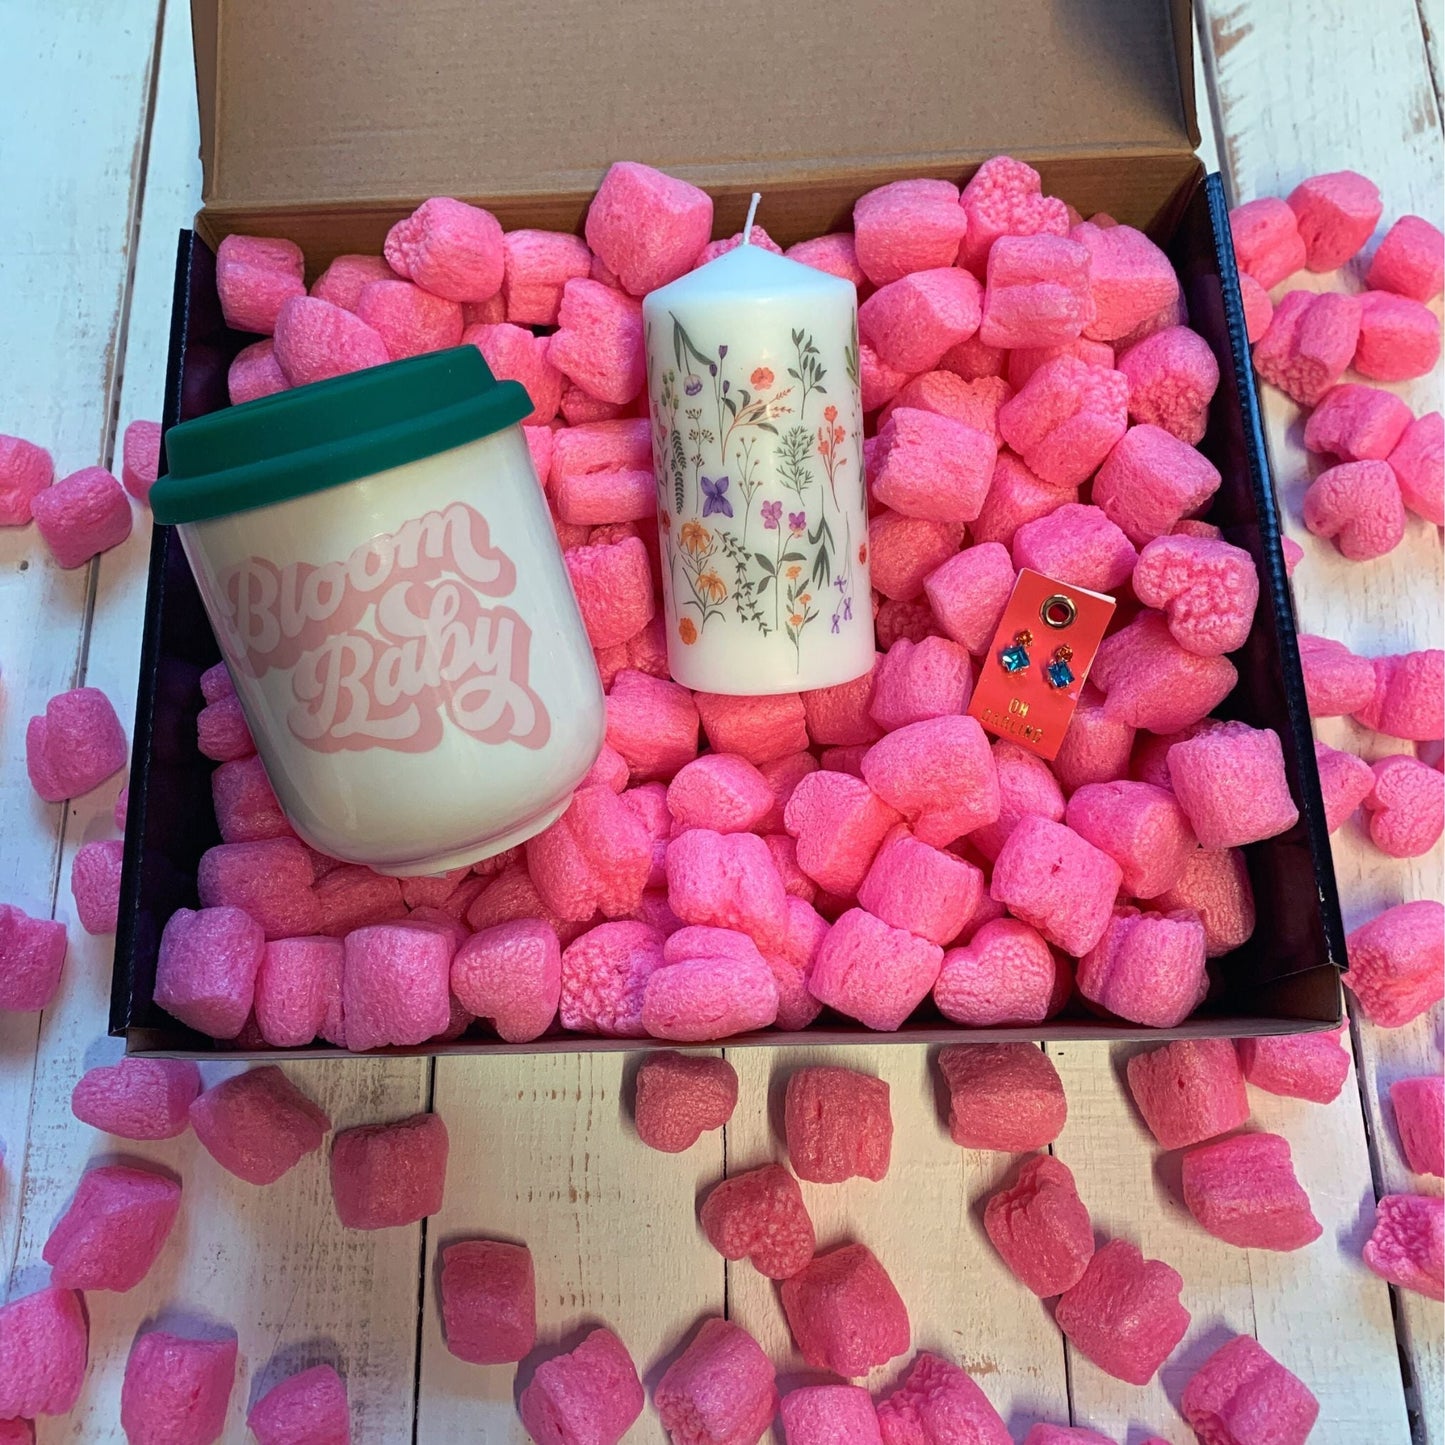 Candle + Sips Gift Box with Compostable Pink Heart Packing Peanuts